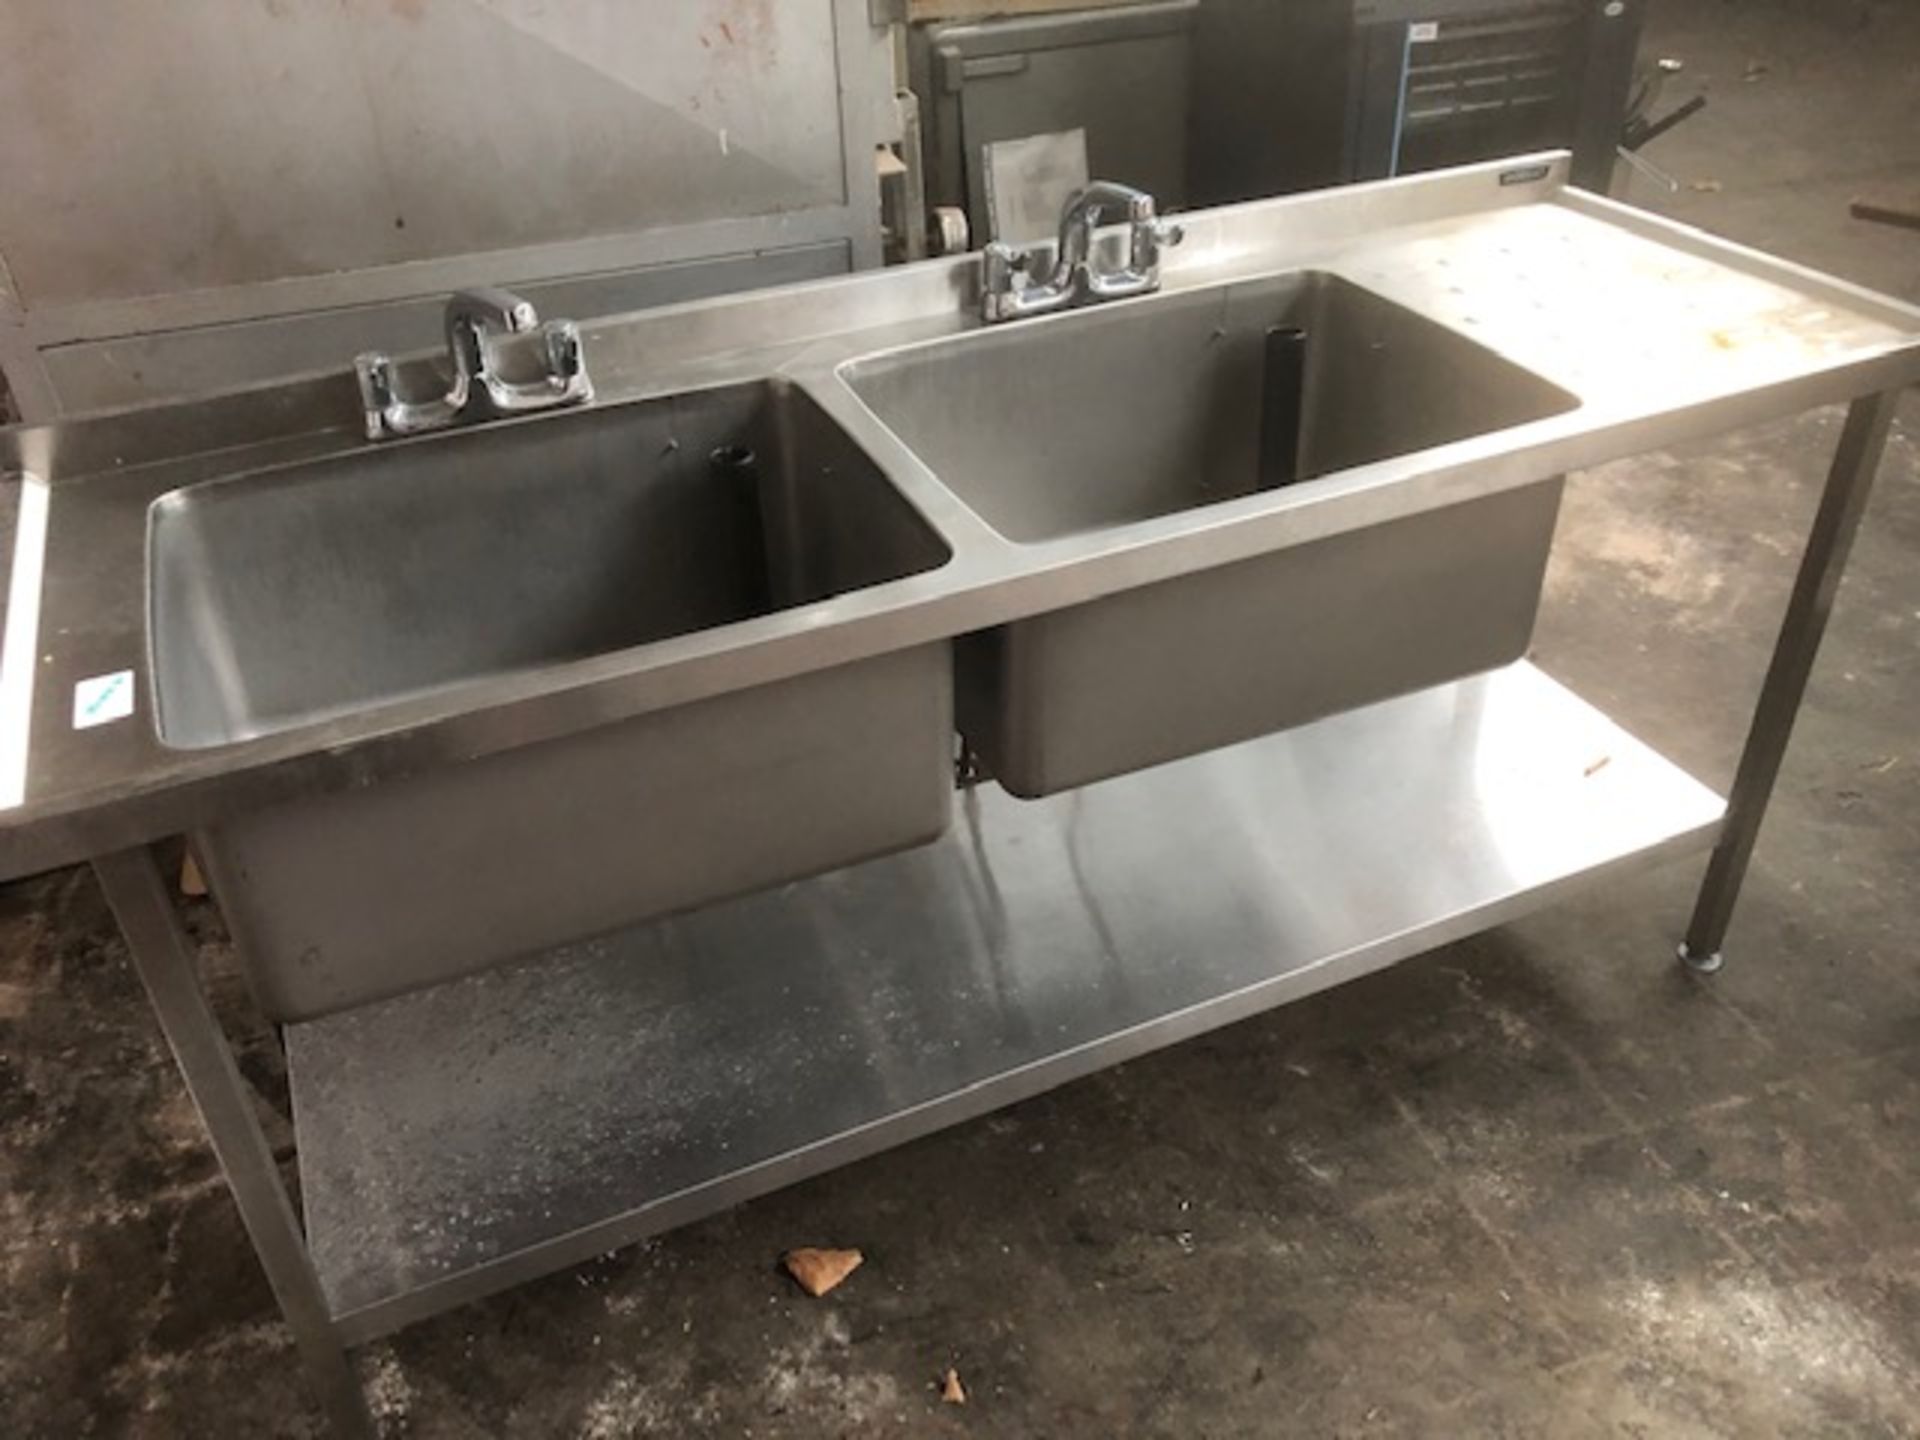 Bespoke Double Bowl Single Drainer Sink And Unit And 3" Level Mixer - Image 2 of 2